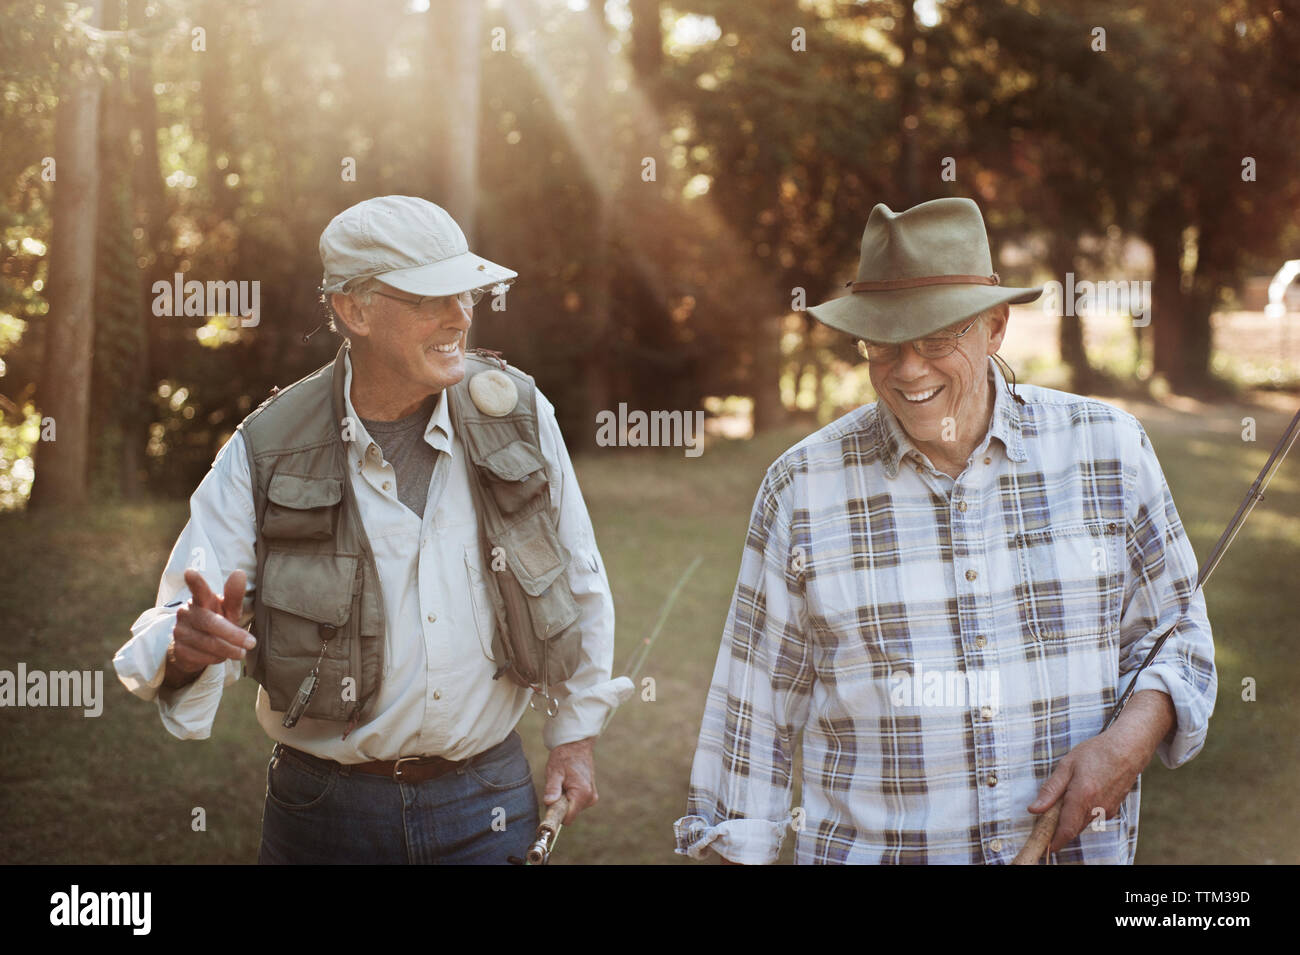 Happy senior men holding fishing rods while walking in forest Stock Photo